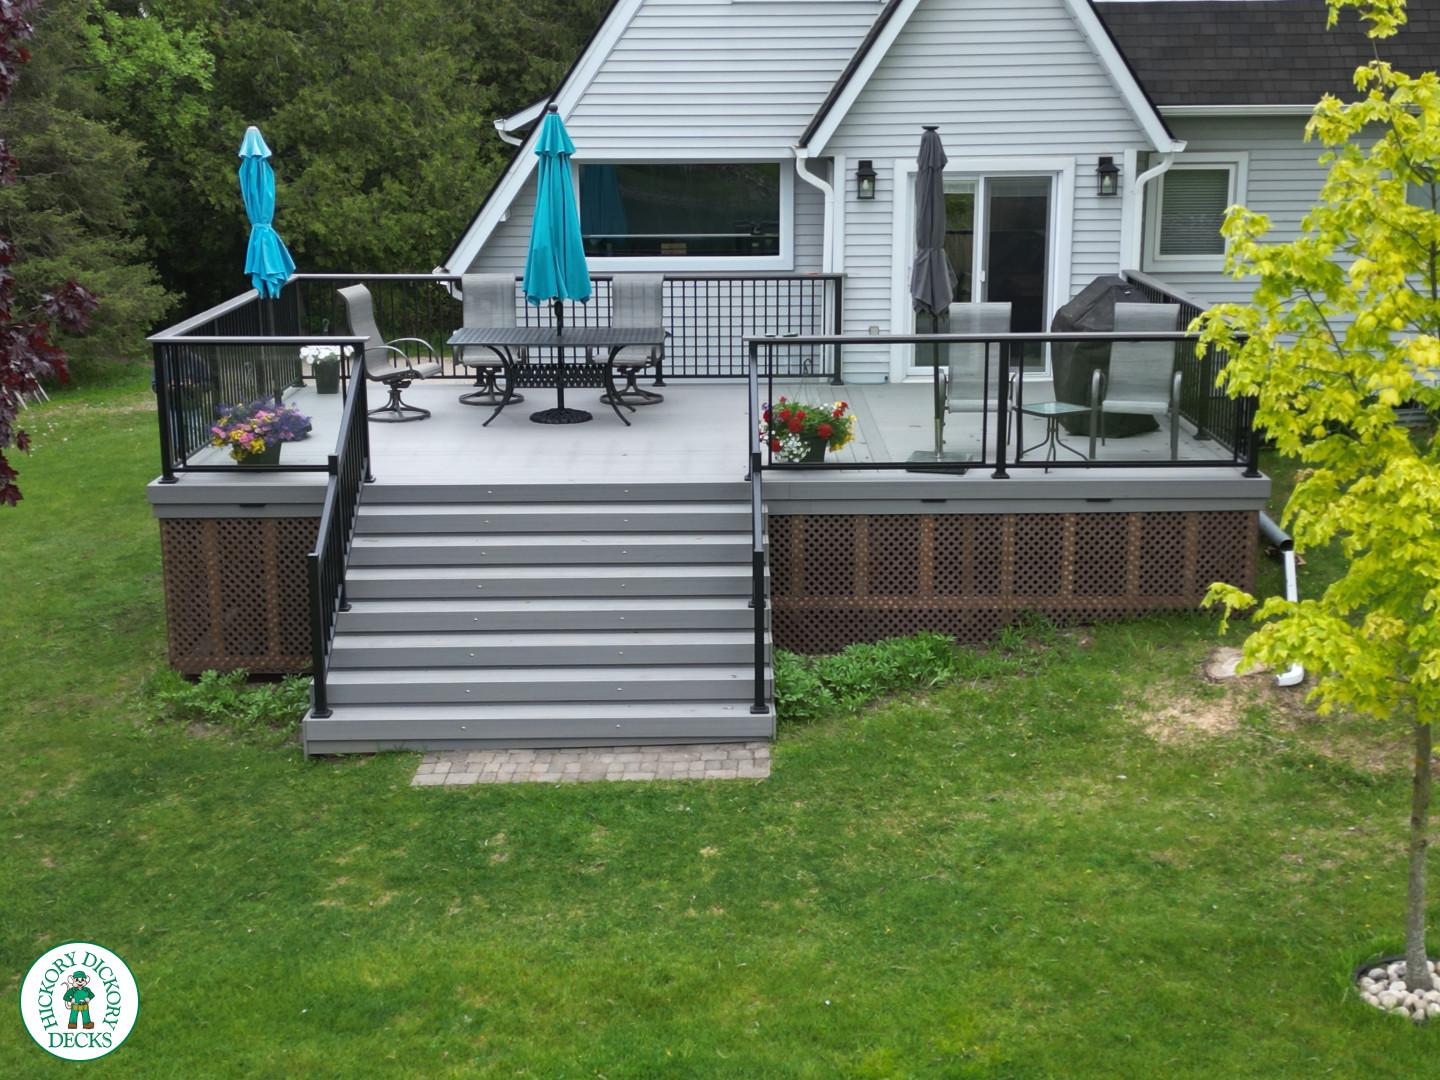 composite backyard deck and stairs